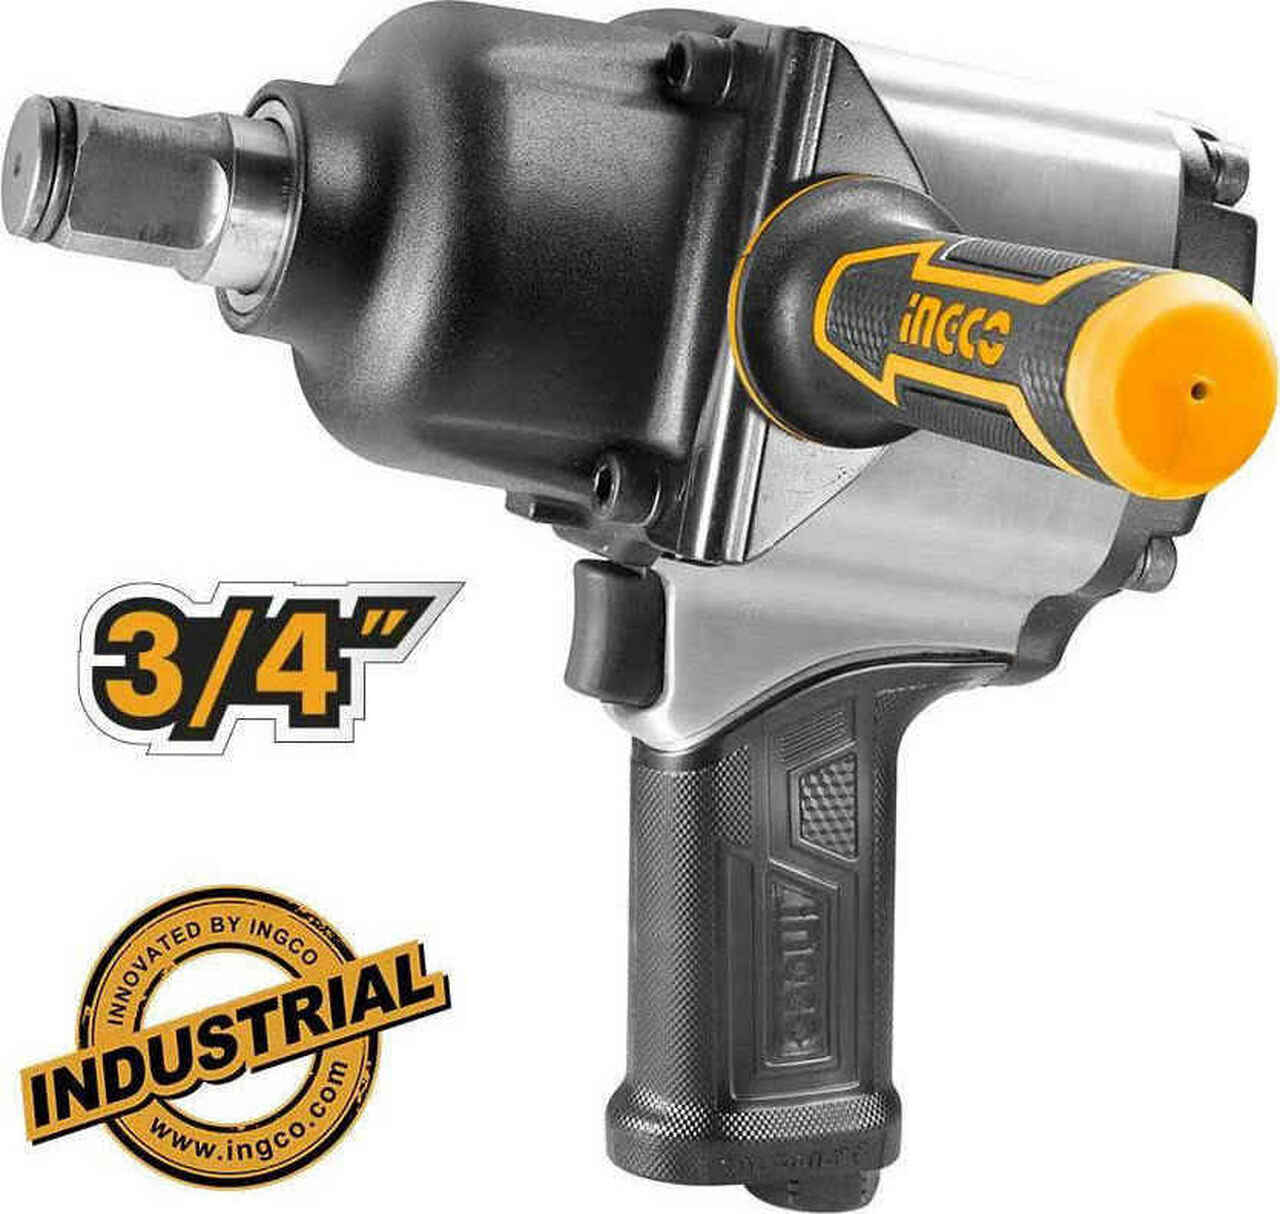 Air Impact Wrench 3/4"